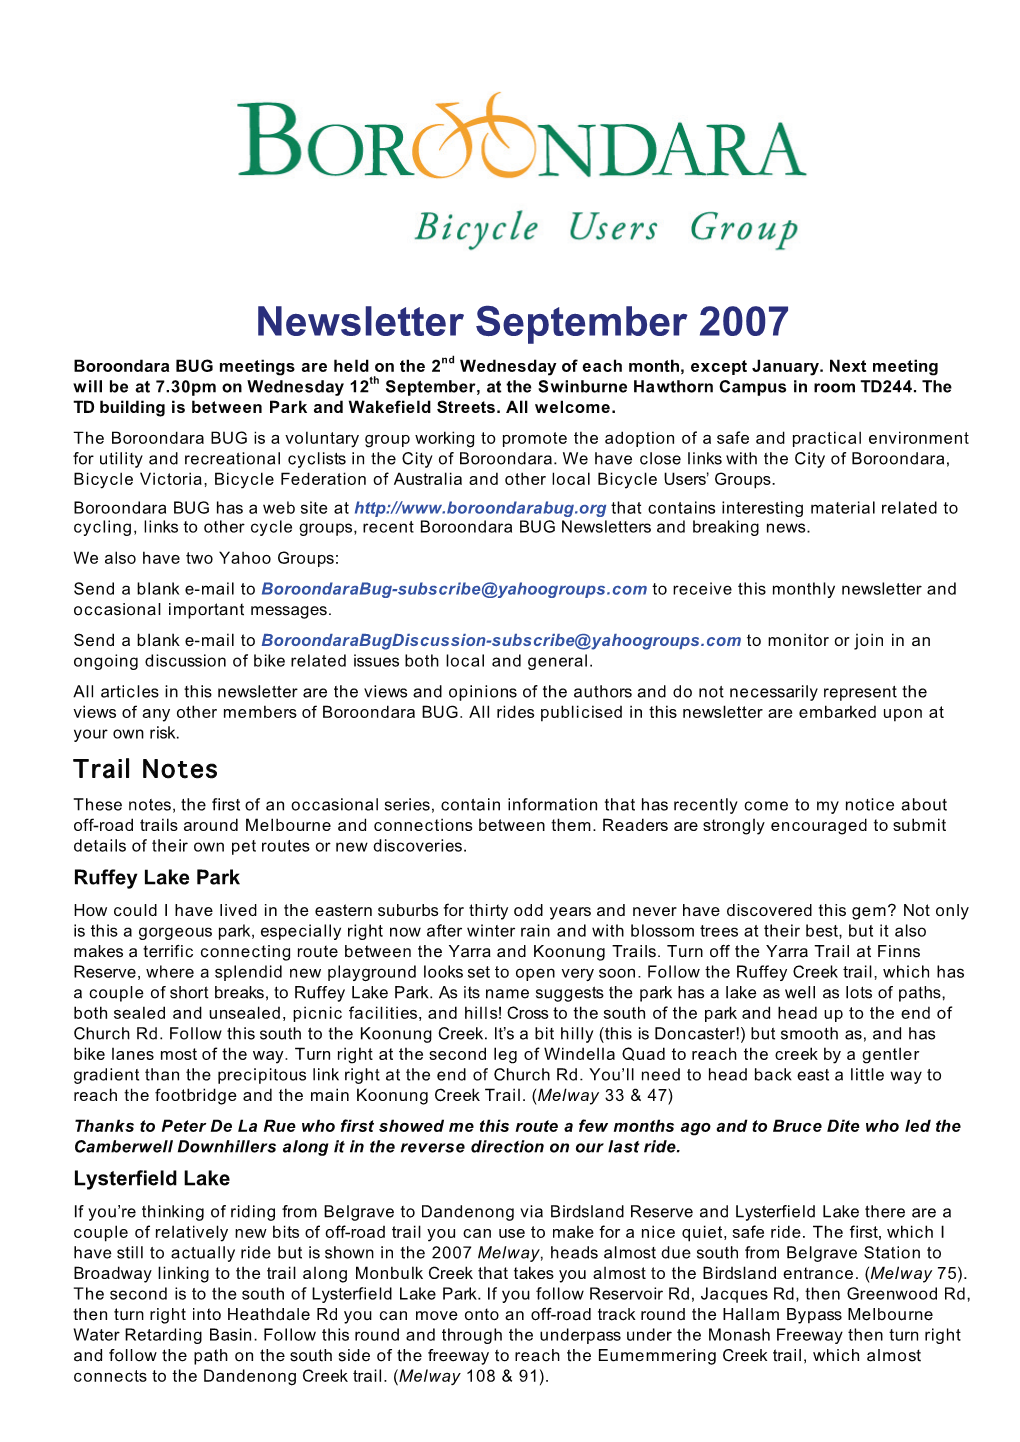 Newsletter September 2007 Boroondara BUG Meetings Are Held on the 2Nd Wednesday of Each Month, Except January